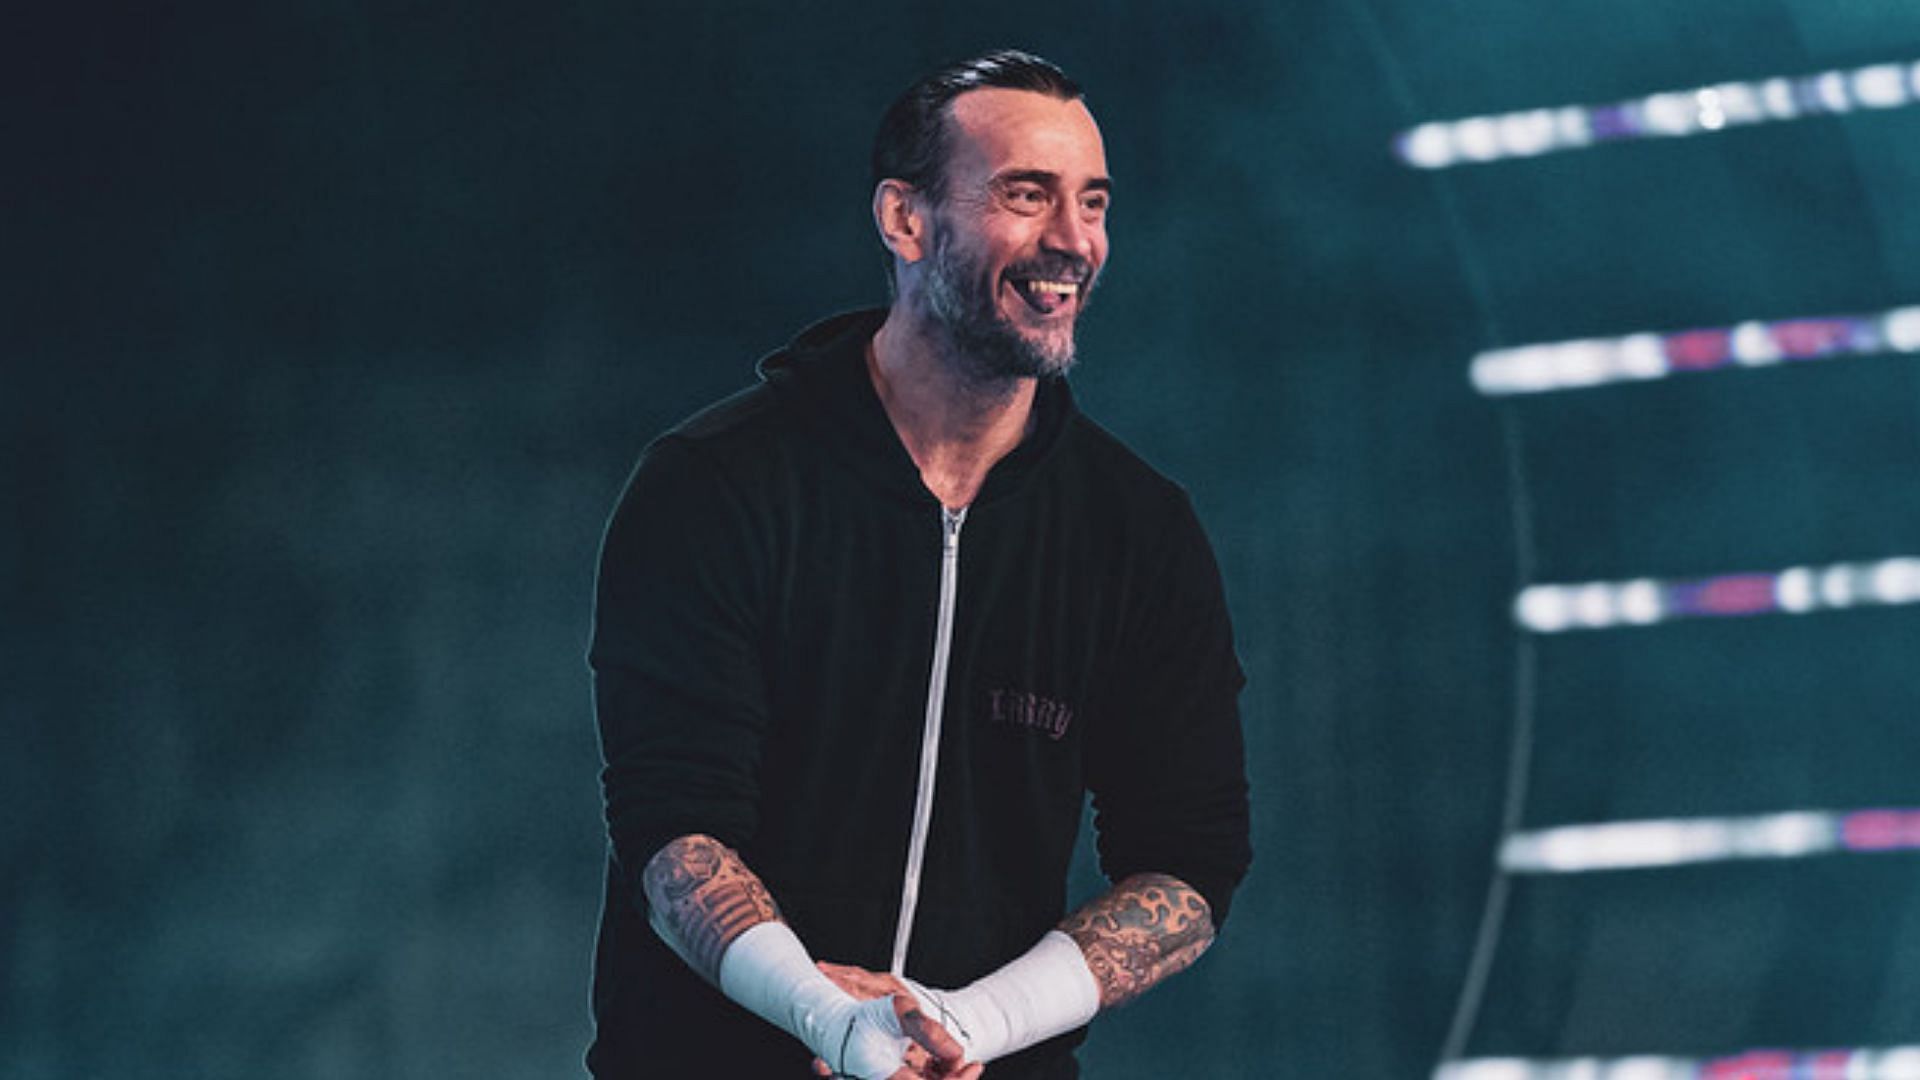 CM Punk has got a lot of control backstage in AEW